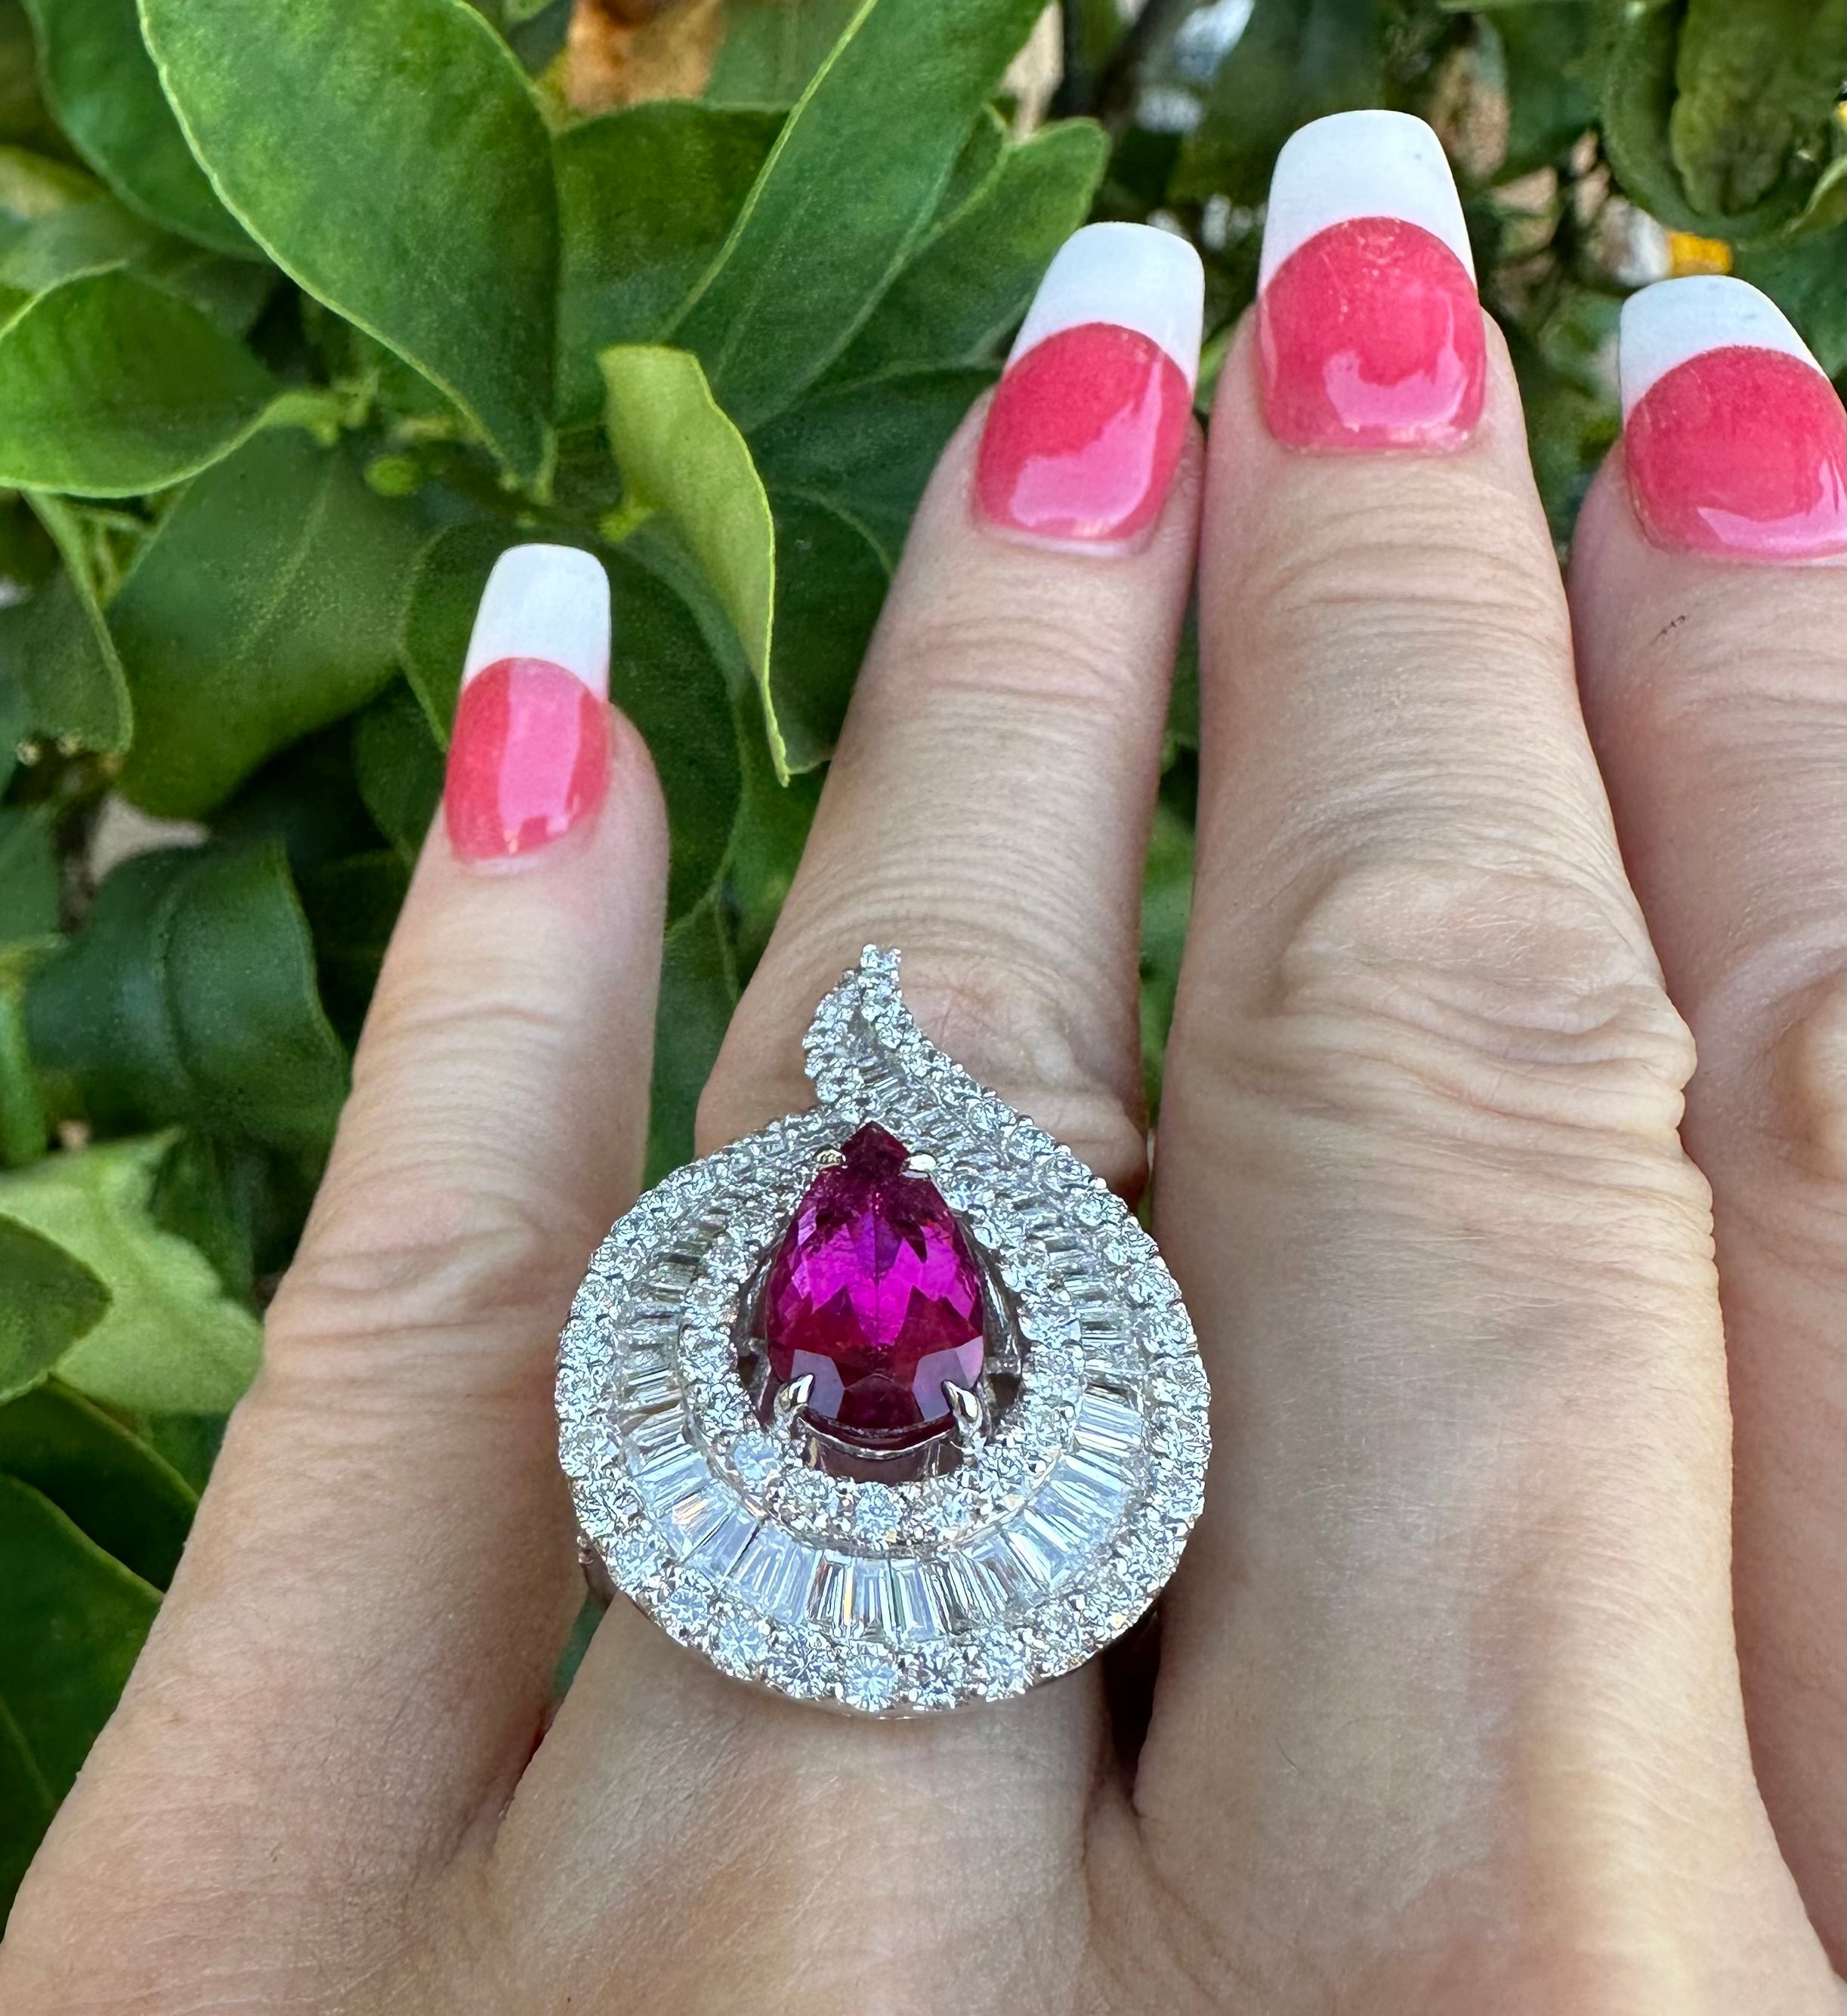 Ravishing and stately, 18 karat white gold 10.58 carat diamond cocktail ring features a large tear drop pear shaped design with an open center that has a vivid pinkish red natural no heat Brazilian rubellite in the center.  This is a very showy and